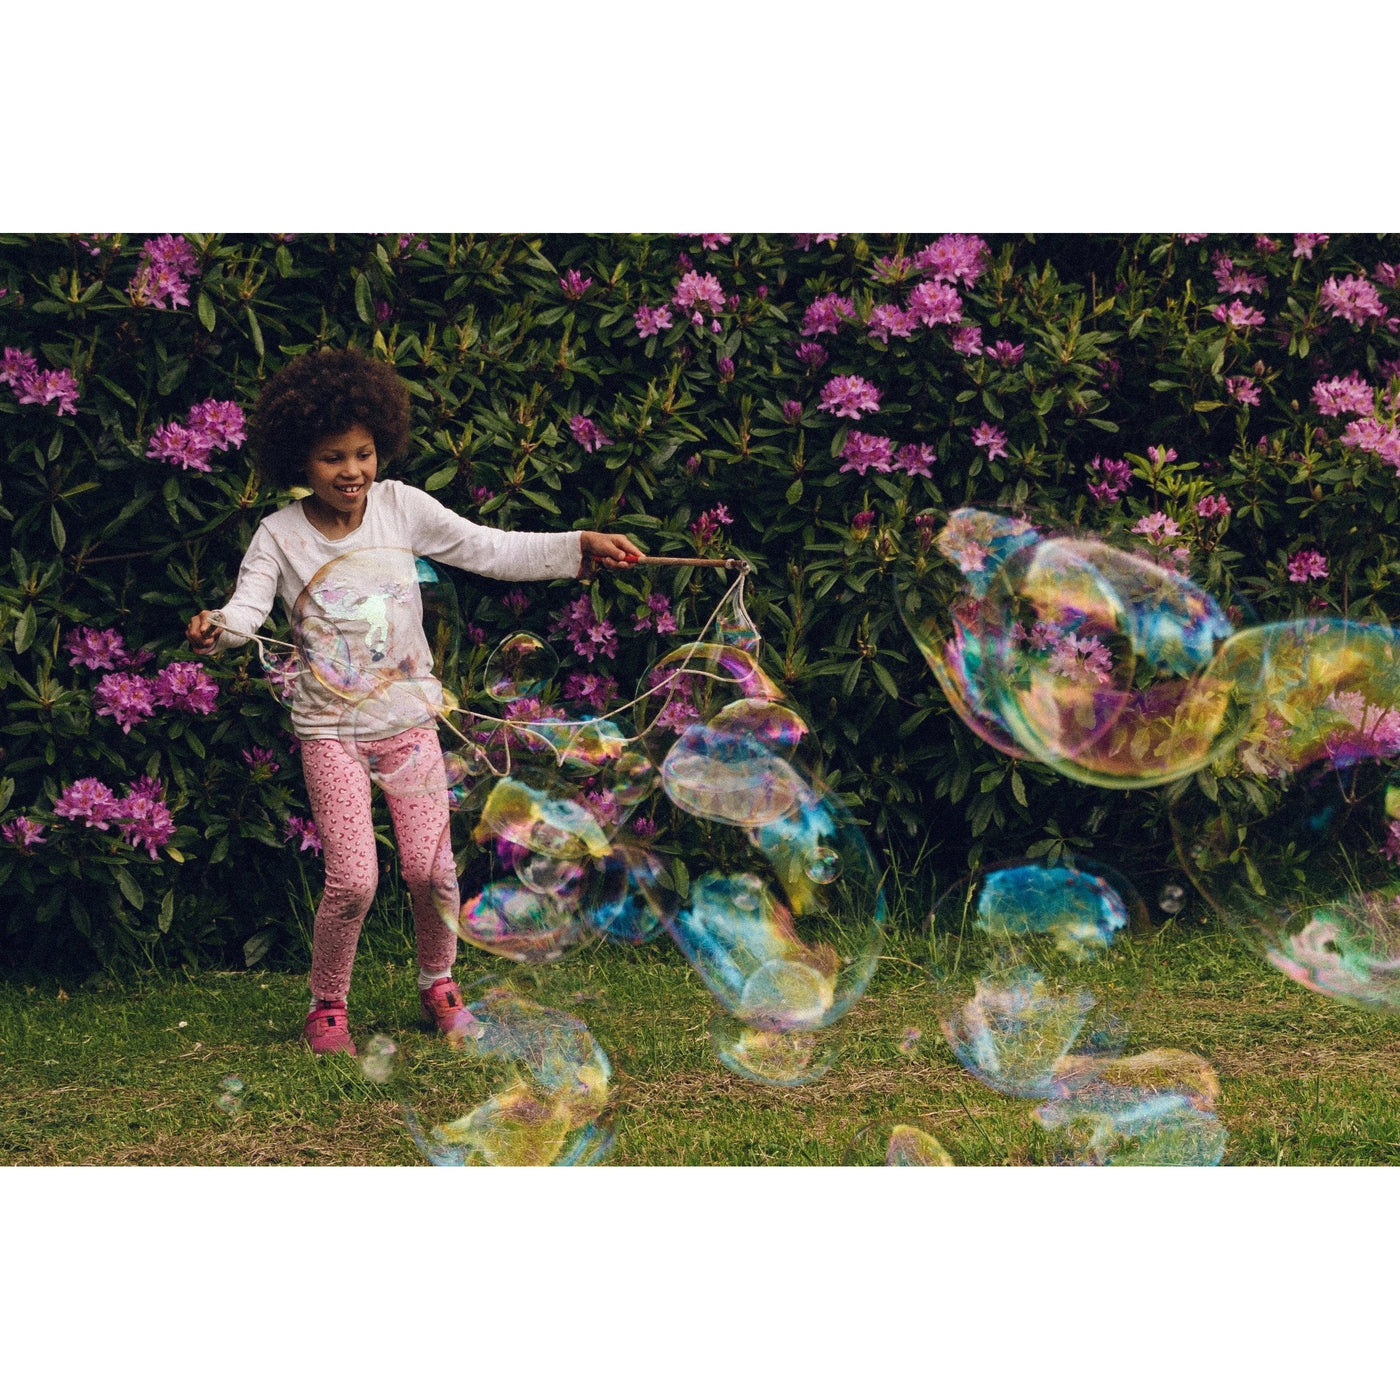 Dr Zigs My Loads of Bubble Kit Perfect for Making Giant Bubbles